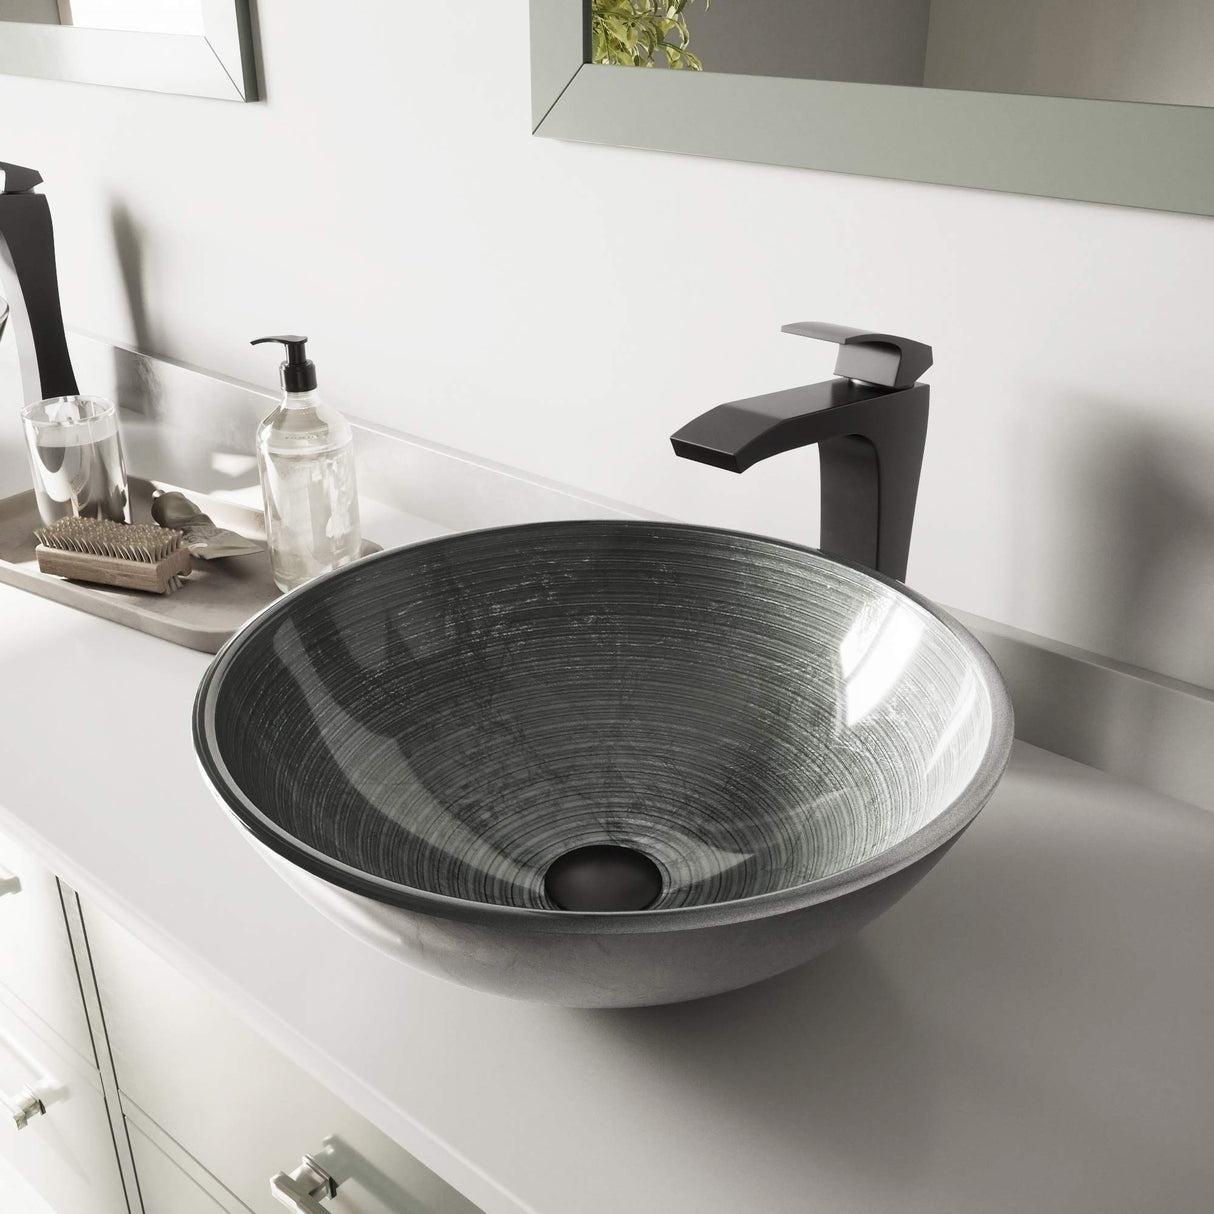 VIGO VGT609 16.5" L -16.5" W -11.63" H Handmade Glass Round Vessel Bathroom Sink Set in Simply Silver Finish with Matte Black Single-Handle Waterfall Single Hole Faucet and Pop Up Drain